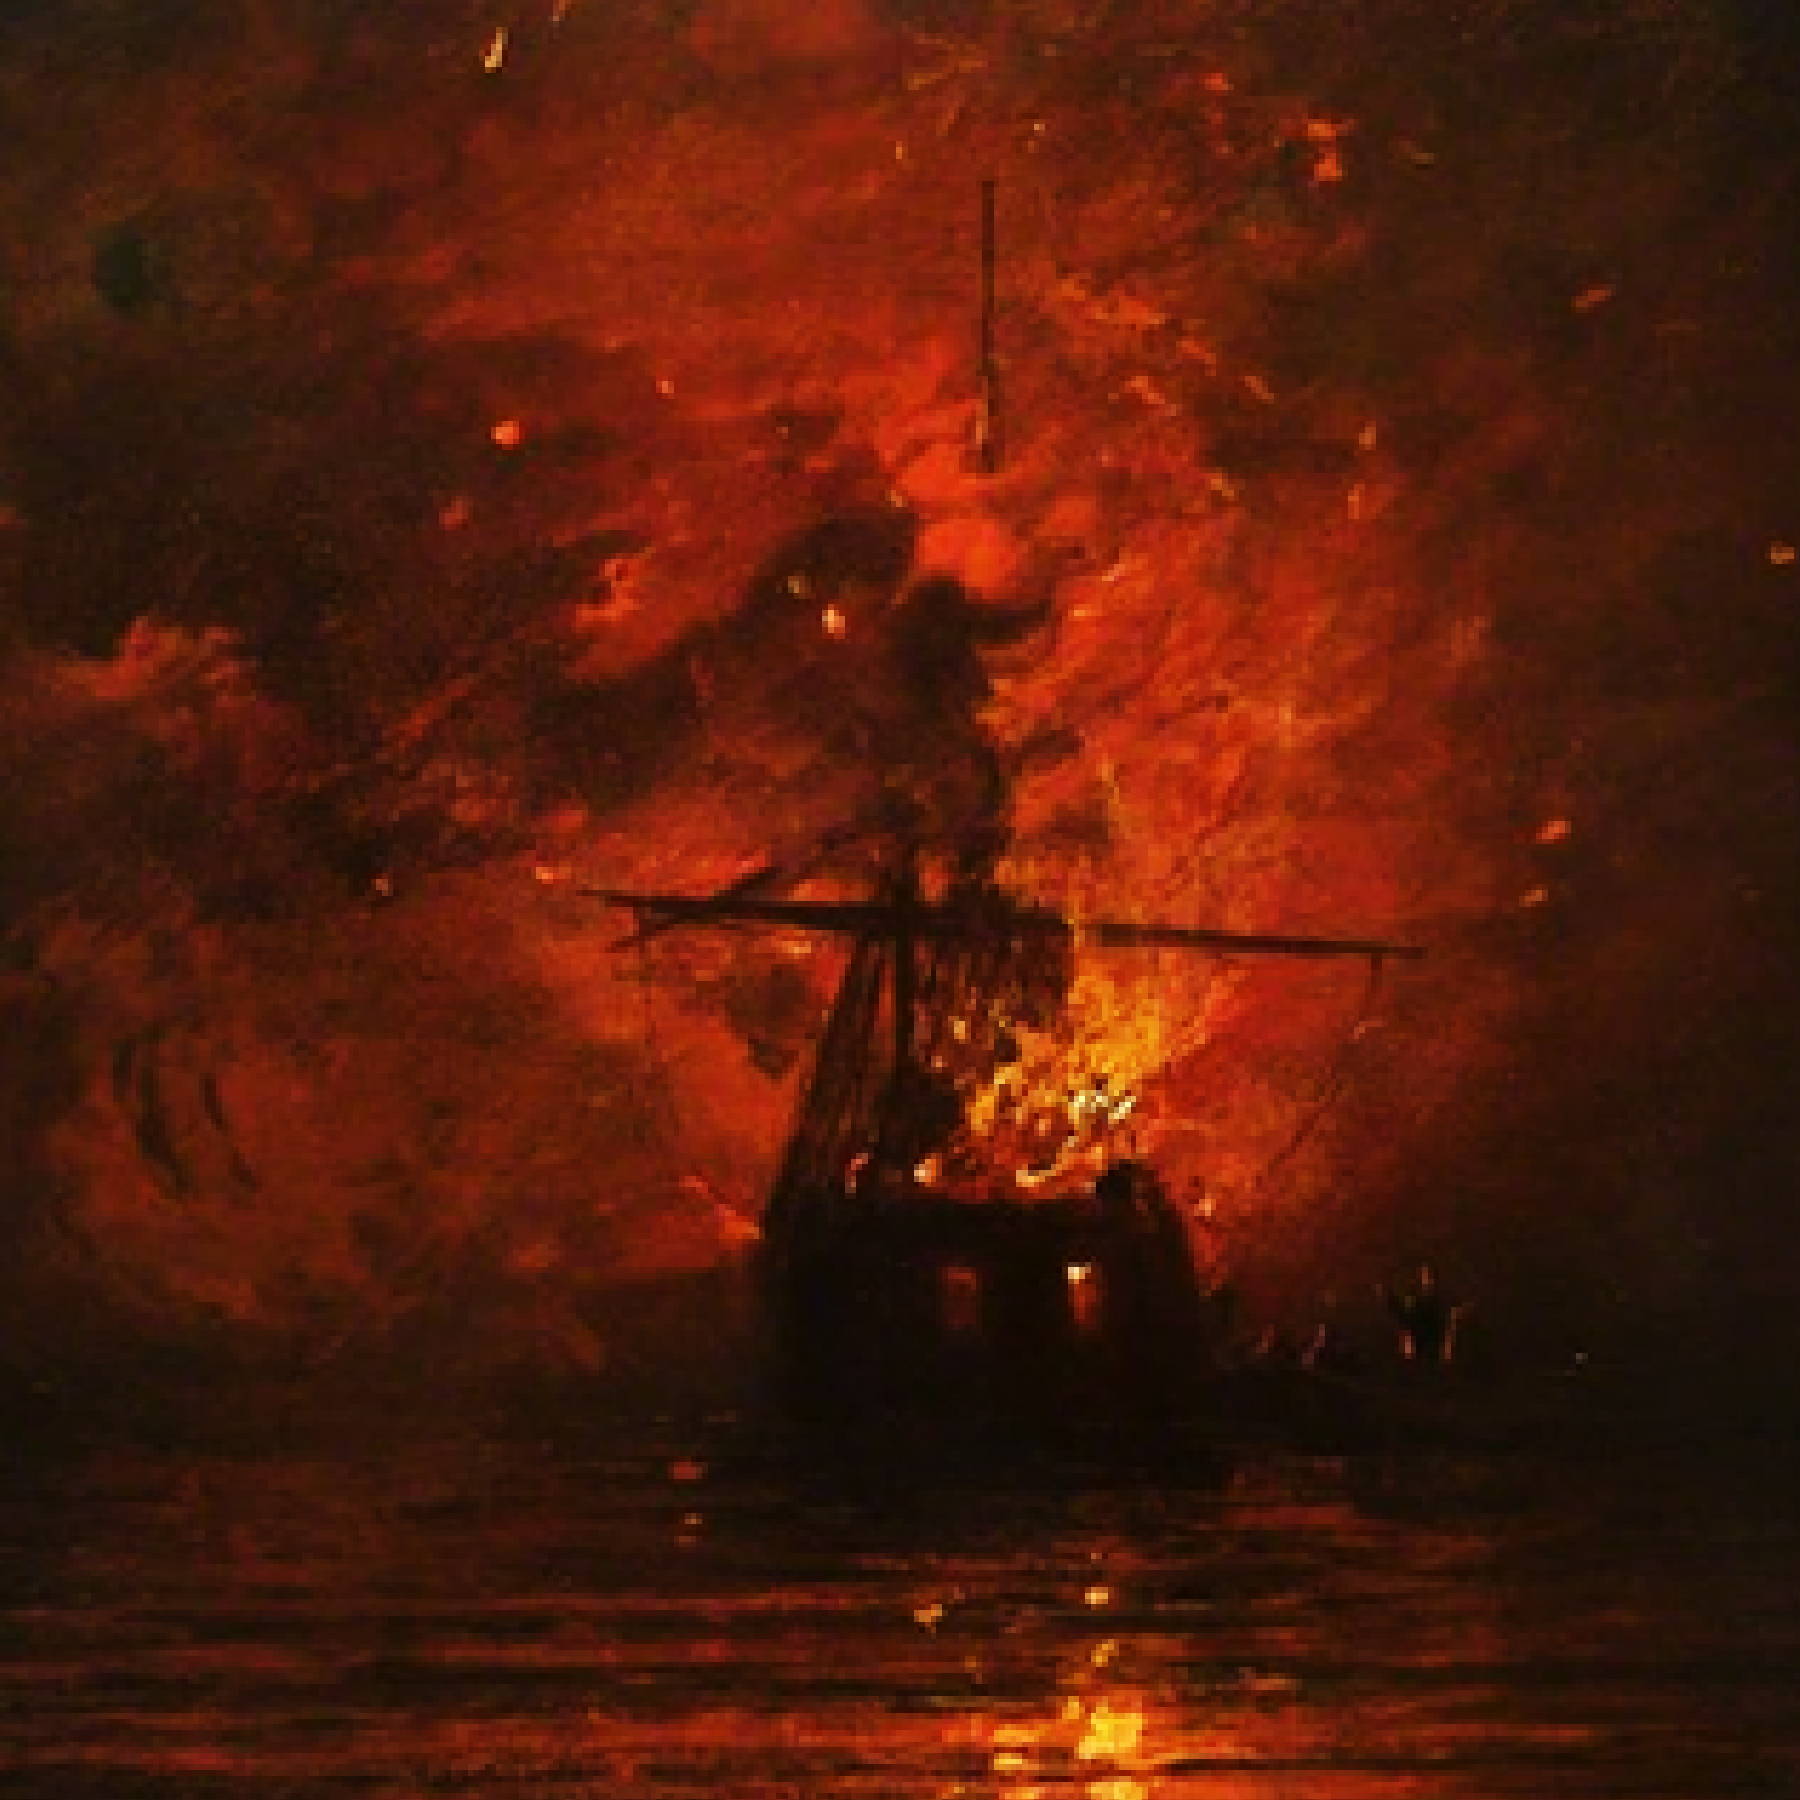 a ship on fire in the water